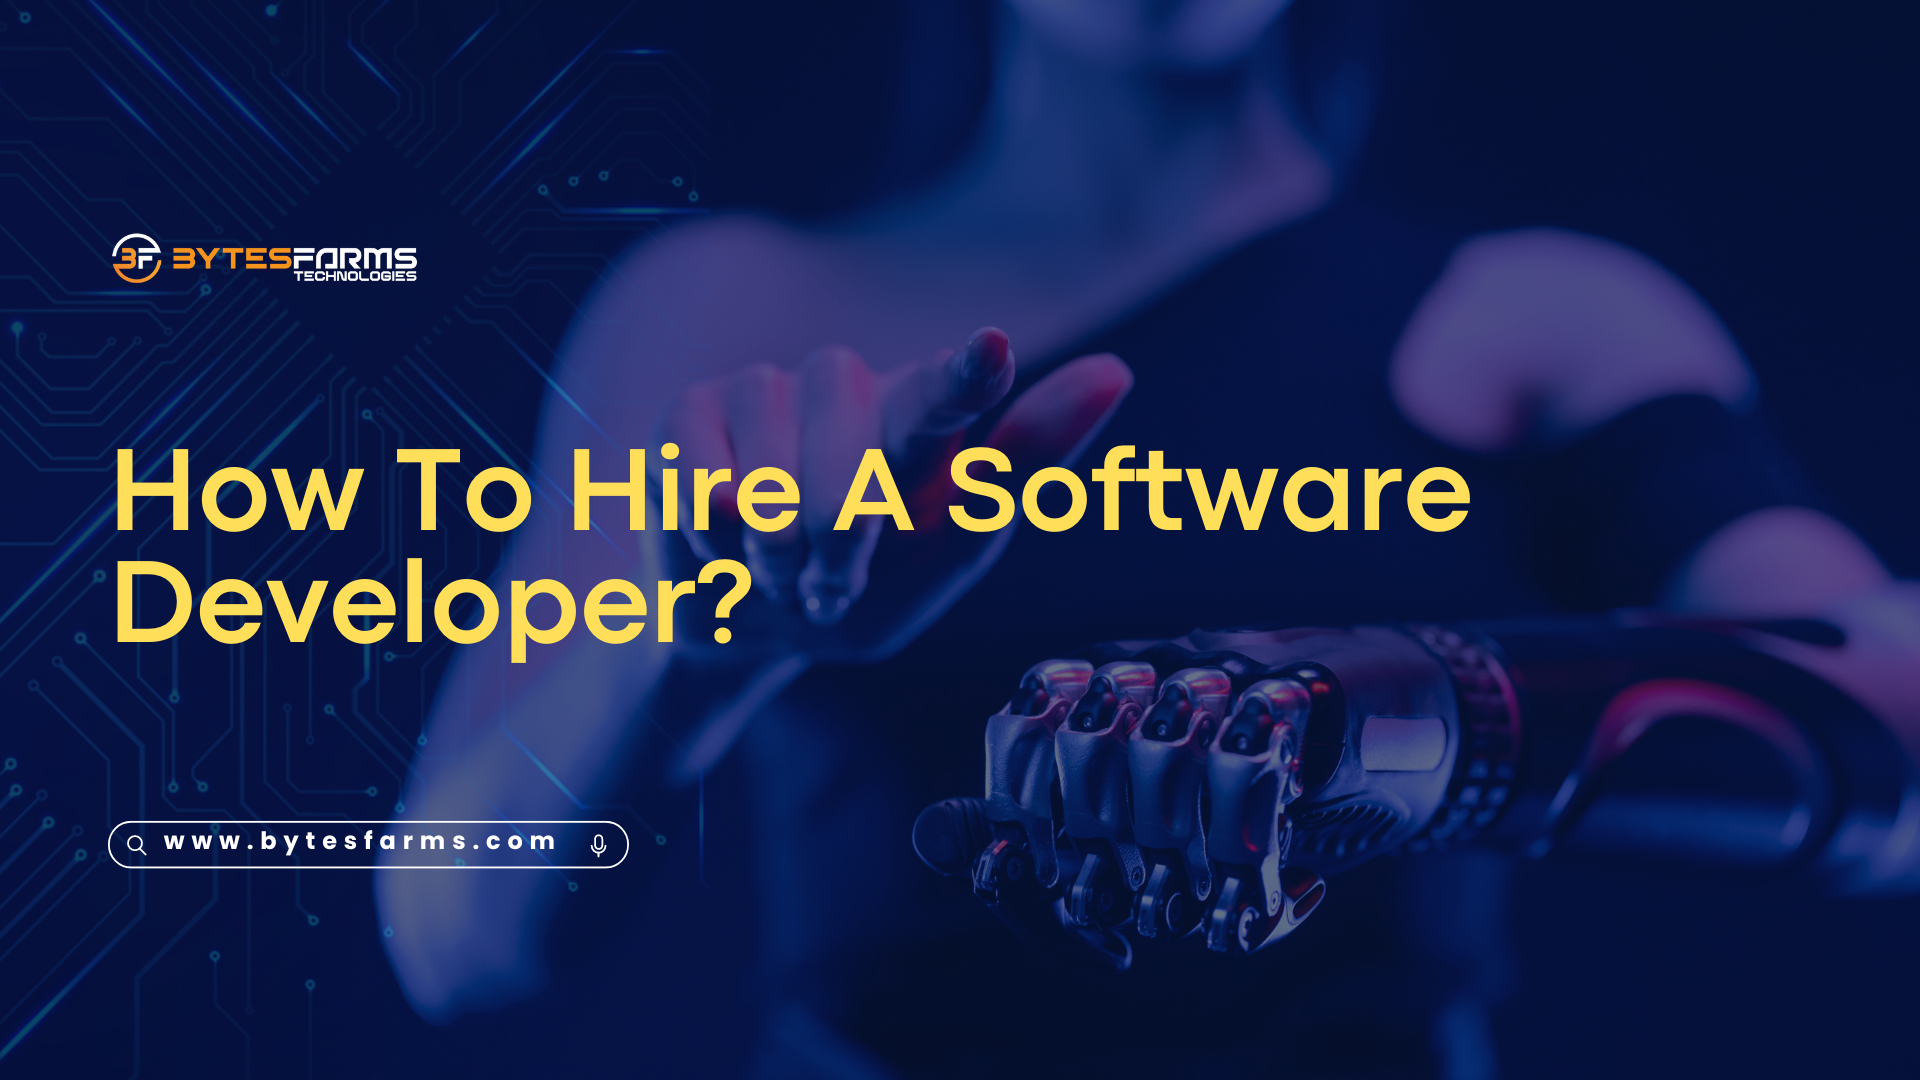 How To Hire A Software Developer?